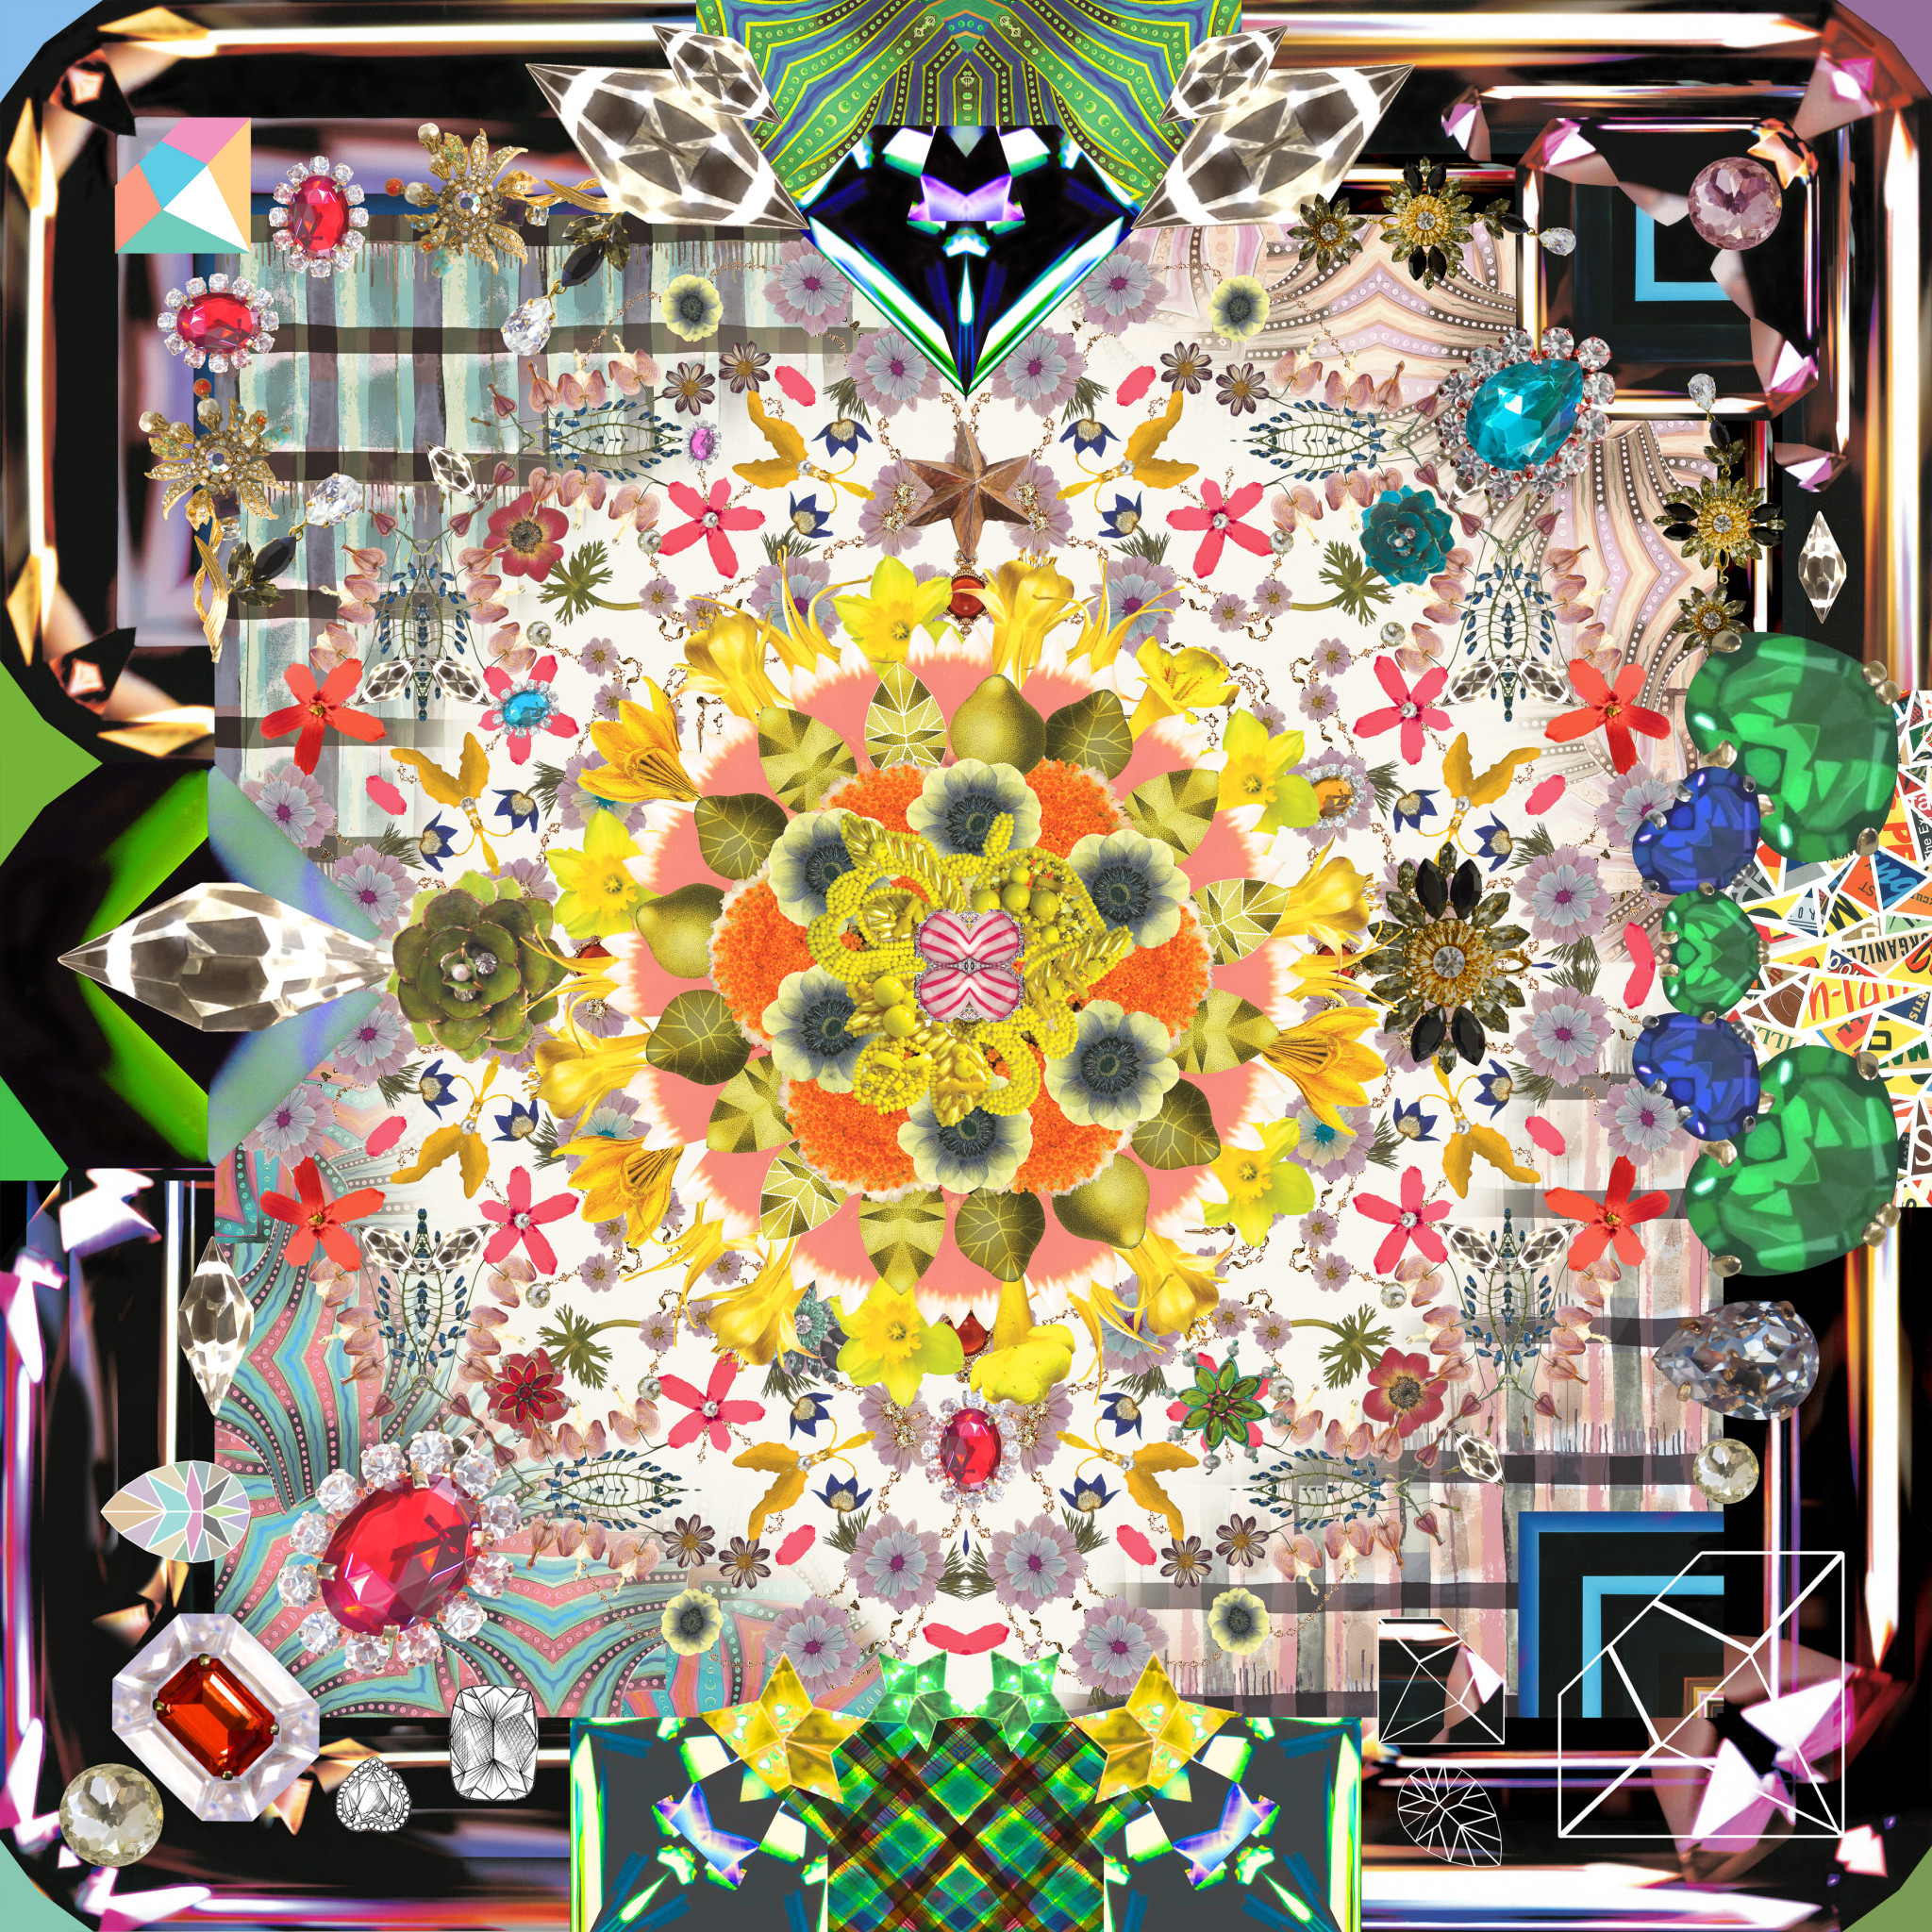 Jewels-Garden-by-Sacha-Walckhoff-Creative-Director-of-Maison-Christian-Lacroix--for-Moooi-Carpets-300dpi